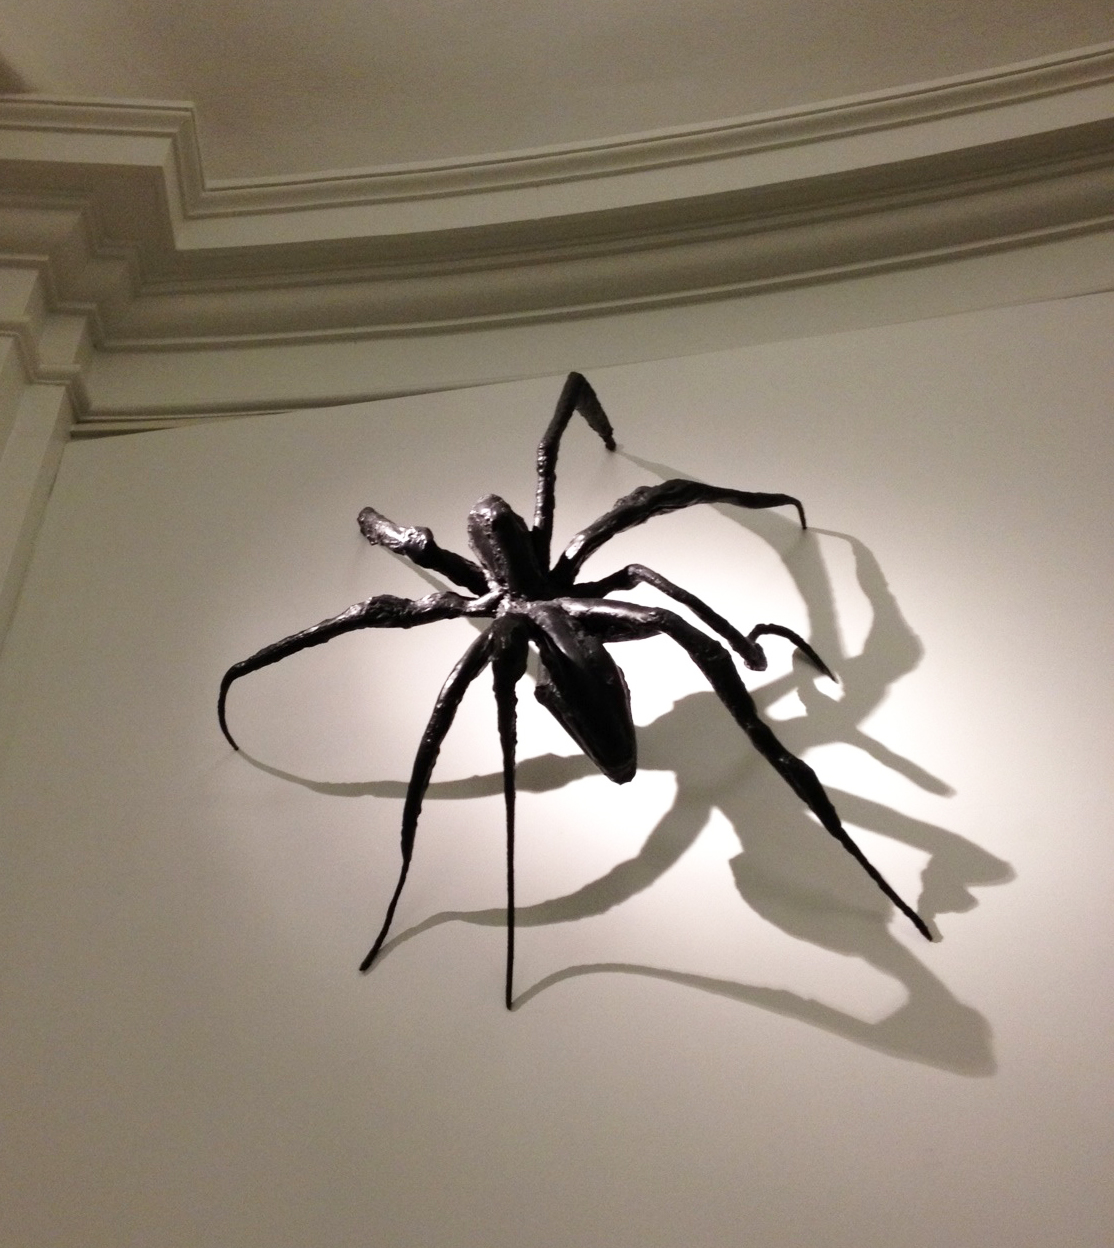 Louise Bourgeois’ ‘Drawings ’47’07’ at new york art